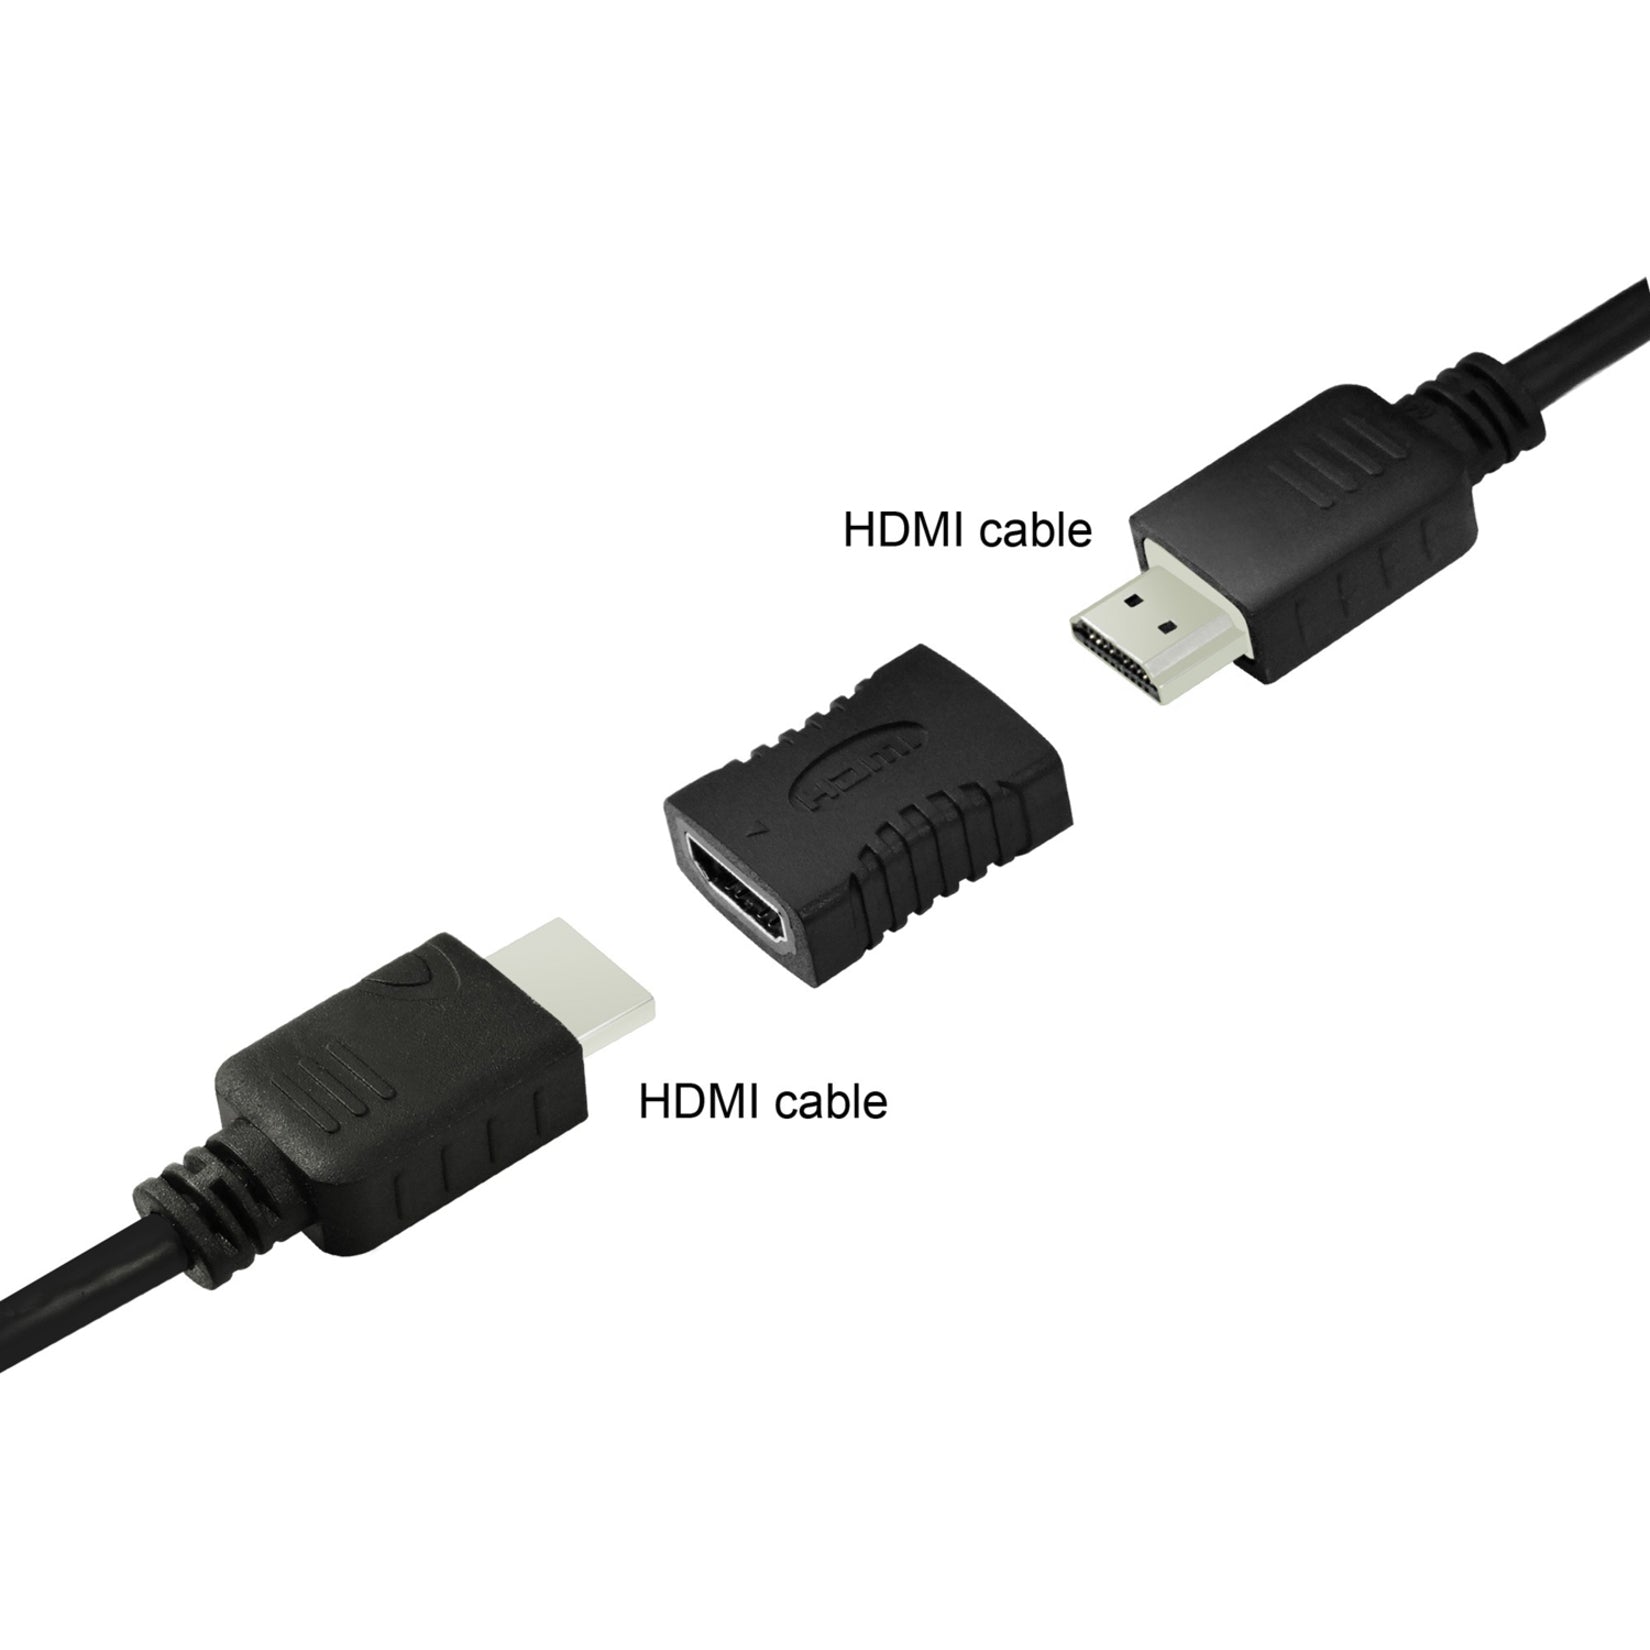 SIIG CE-H22H12-S1 HDMI Coupler Adapter, Corrosion Resistance, Gold-Plated Connectors